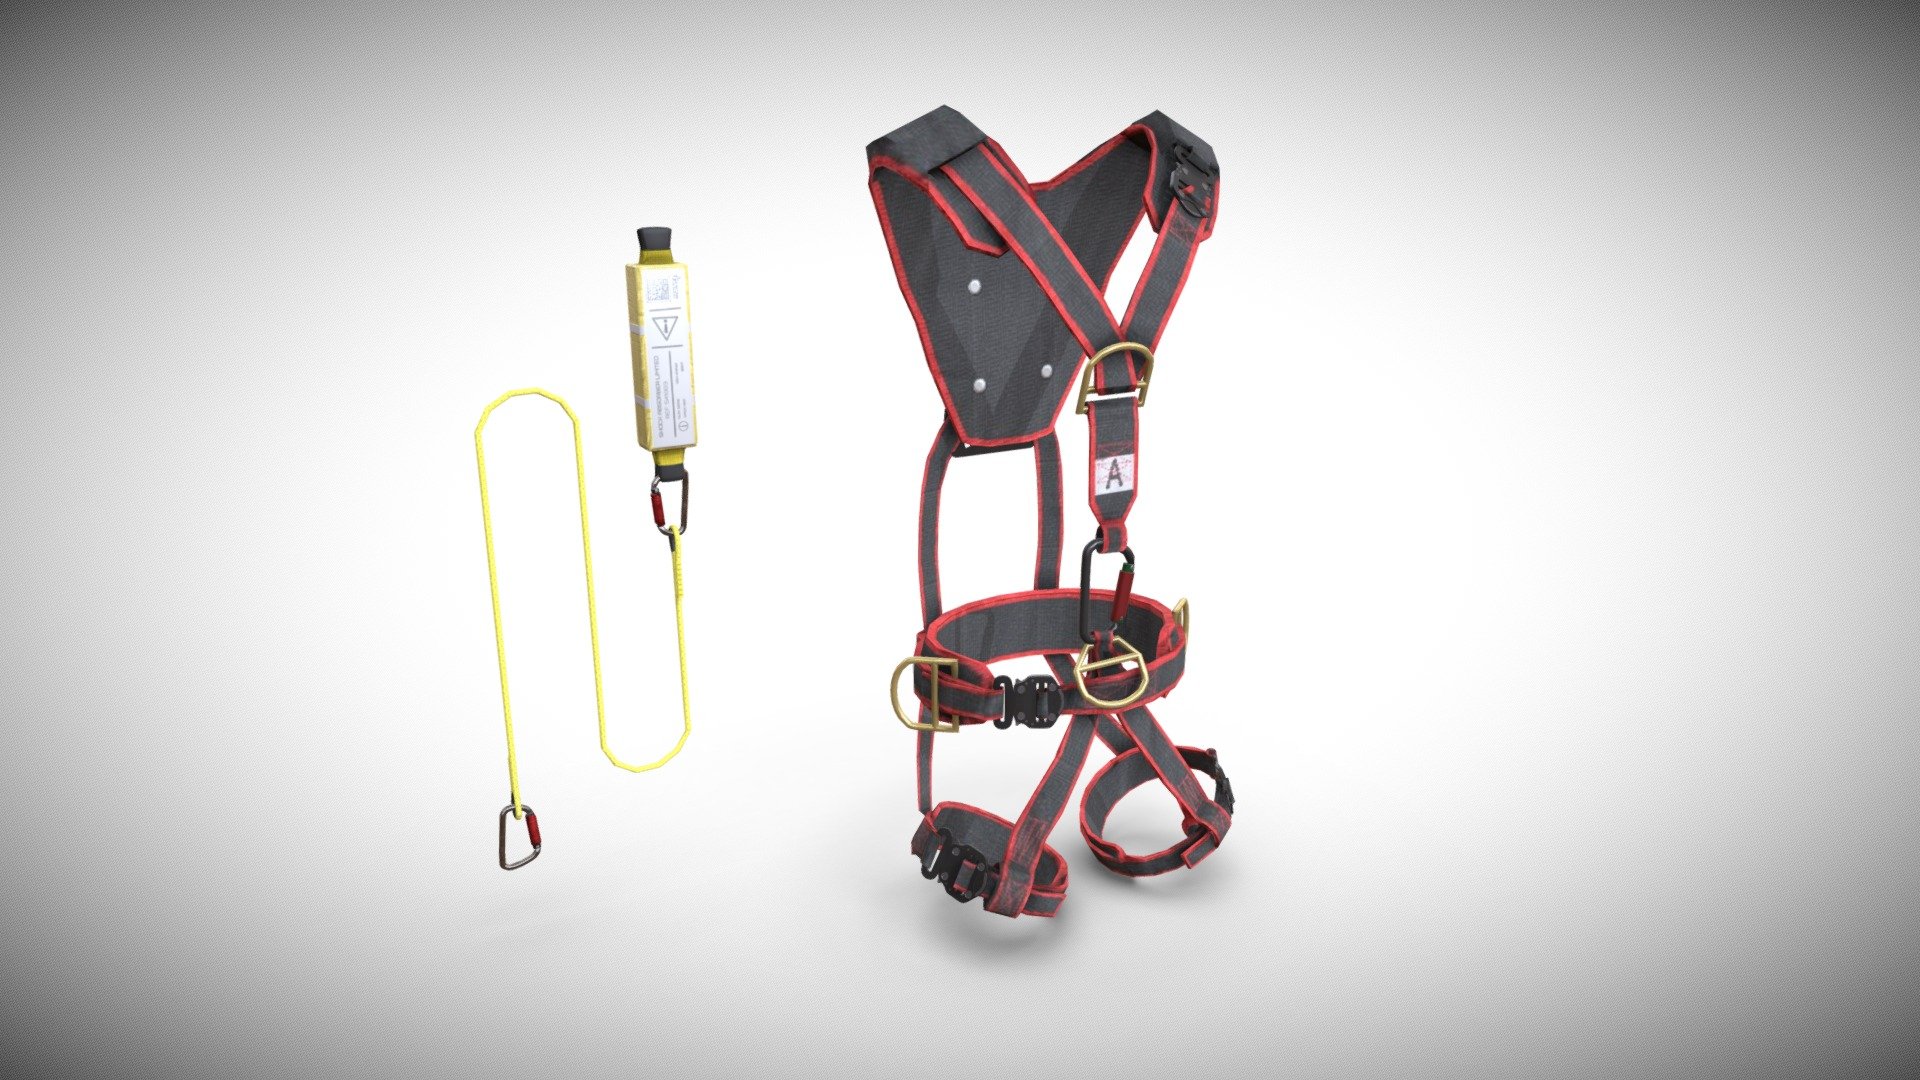 Climbing equipment pack.
-Harness
-Shock absorber and rope
-Carabiner
All texturized following PBR workflow.

Pack de equipamiento de escalada
-Arnes
-Absorbedor
-Mosqueton
Todo textturizado em PBR - Climbing Equipment Security Harness - 3D model by iShoNz (@Jonabafor) 3d model